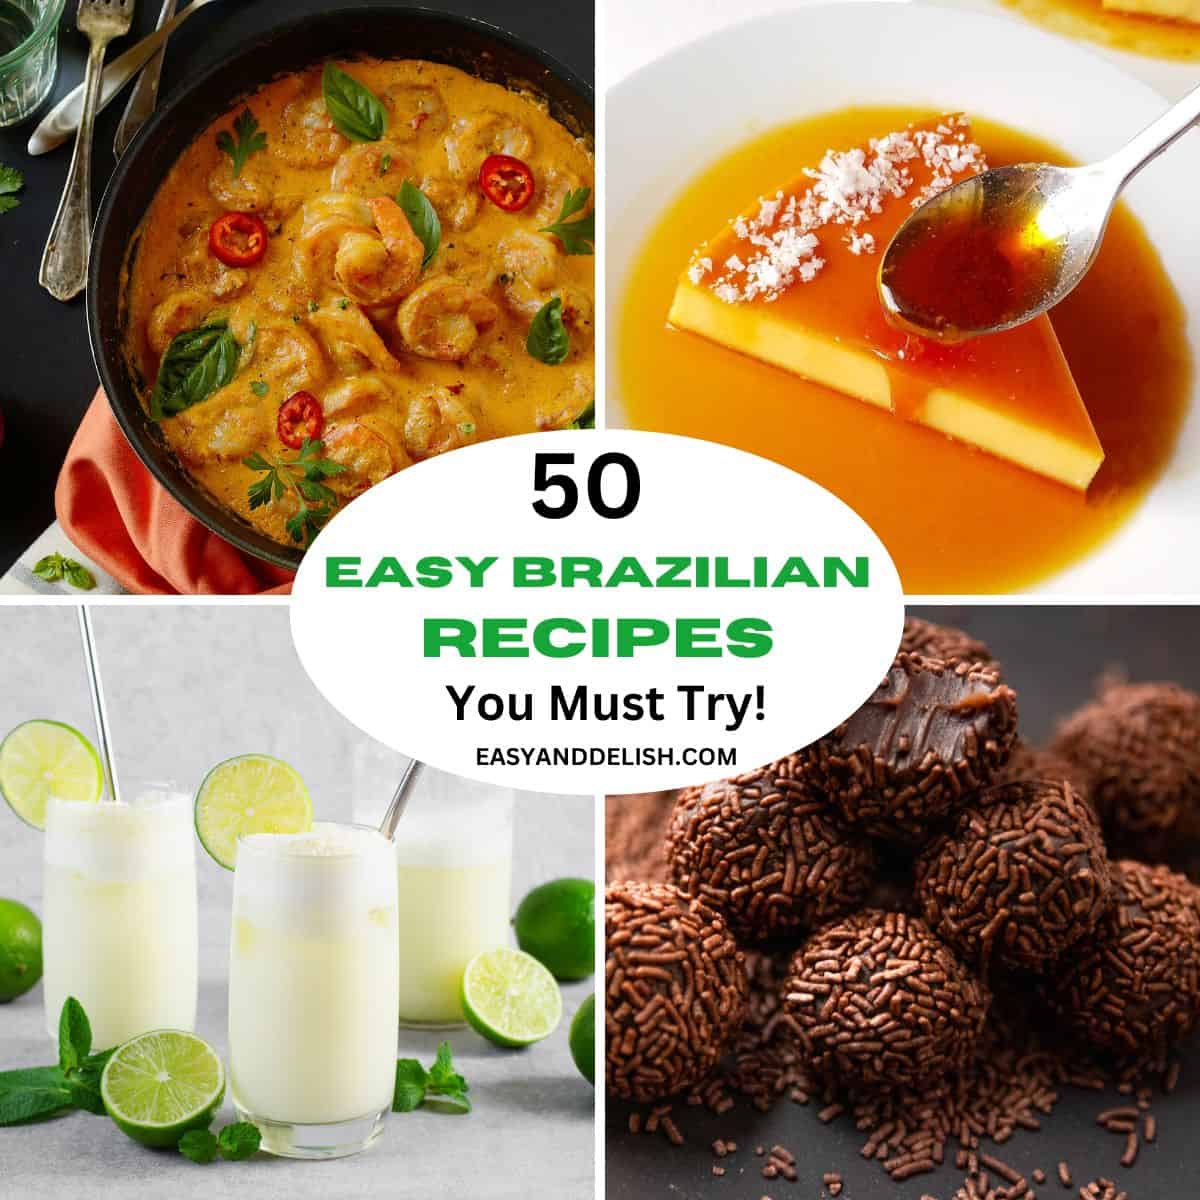 Collage showing 4 out of 50 easy Brazilian recipes.